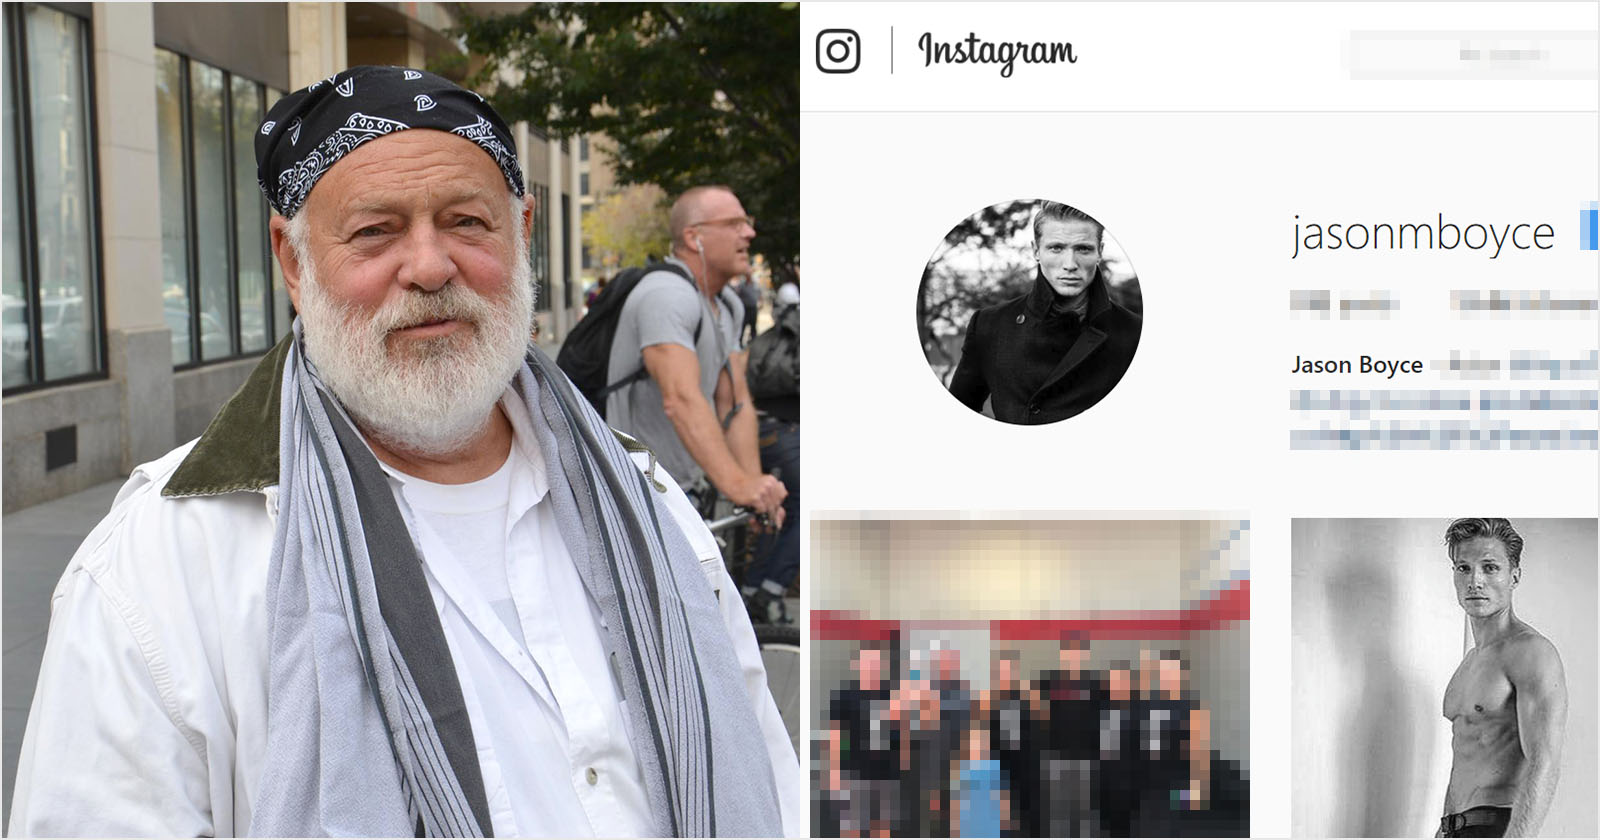 Fashion Photog Bruce Weber Sued by Male Model for Sexual Harassment